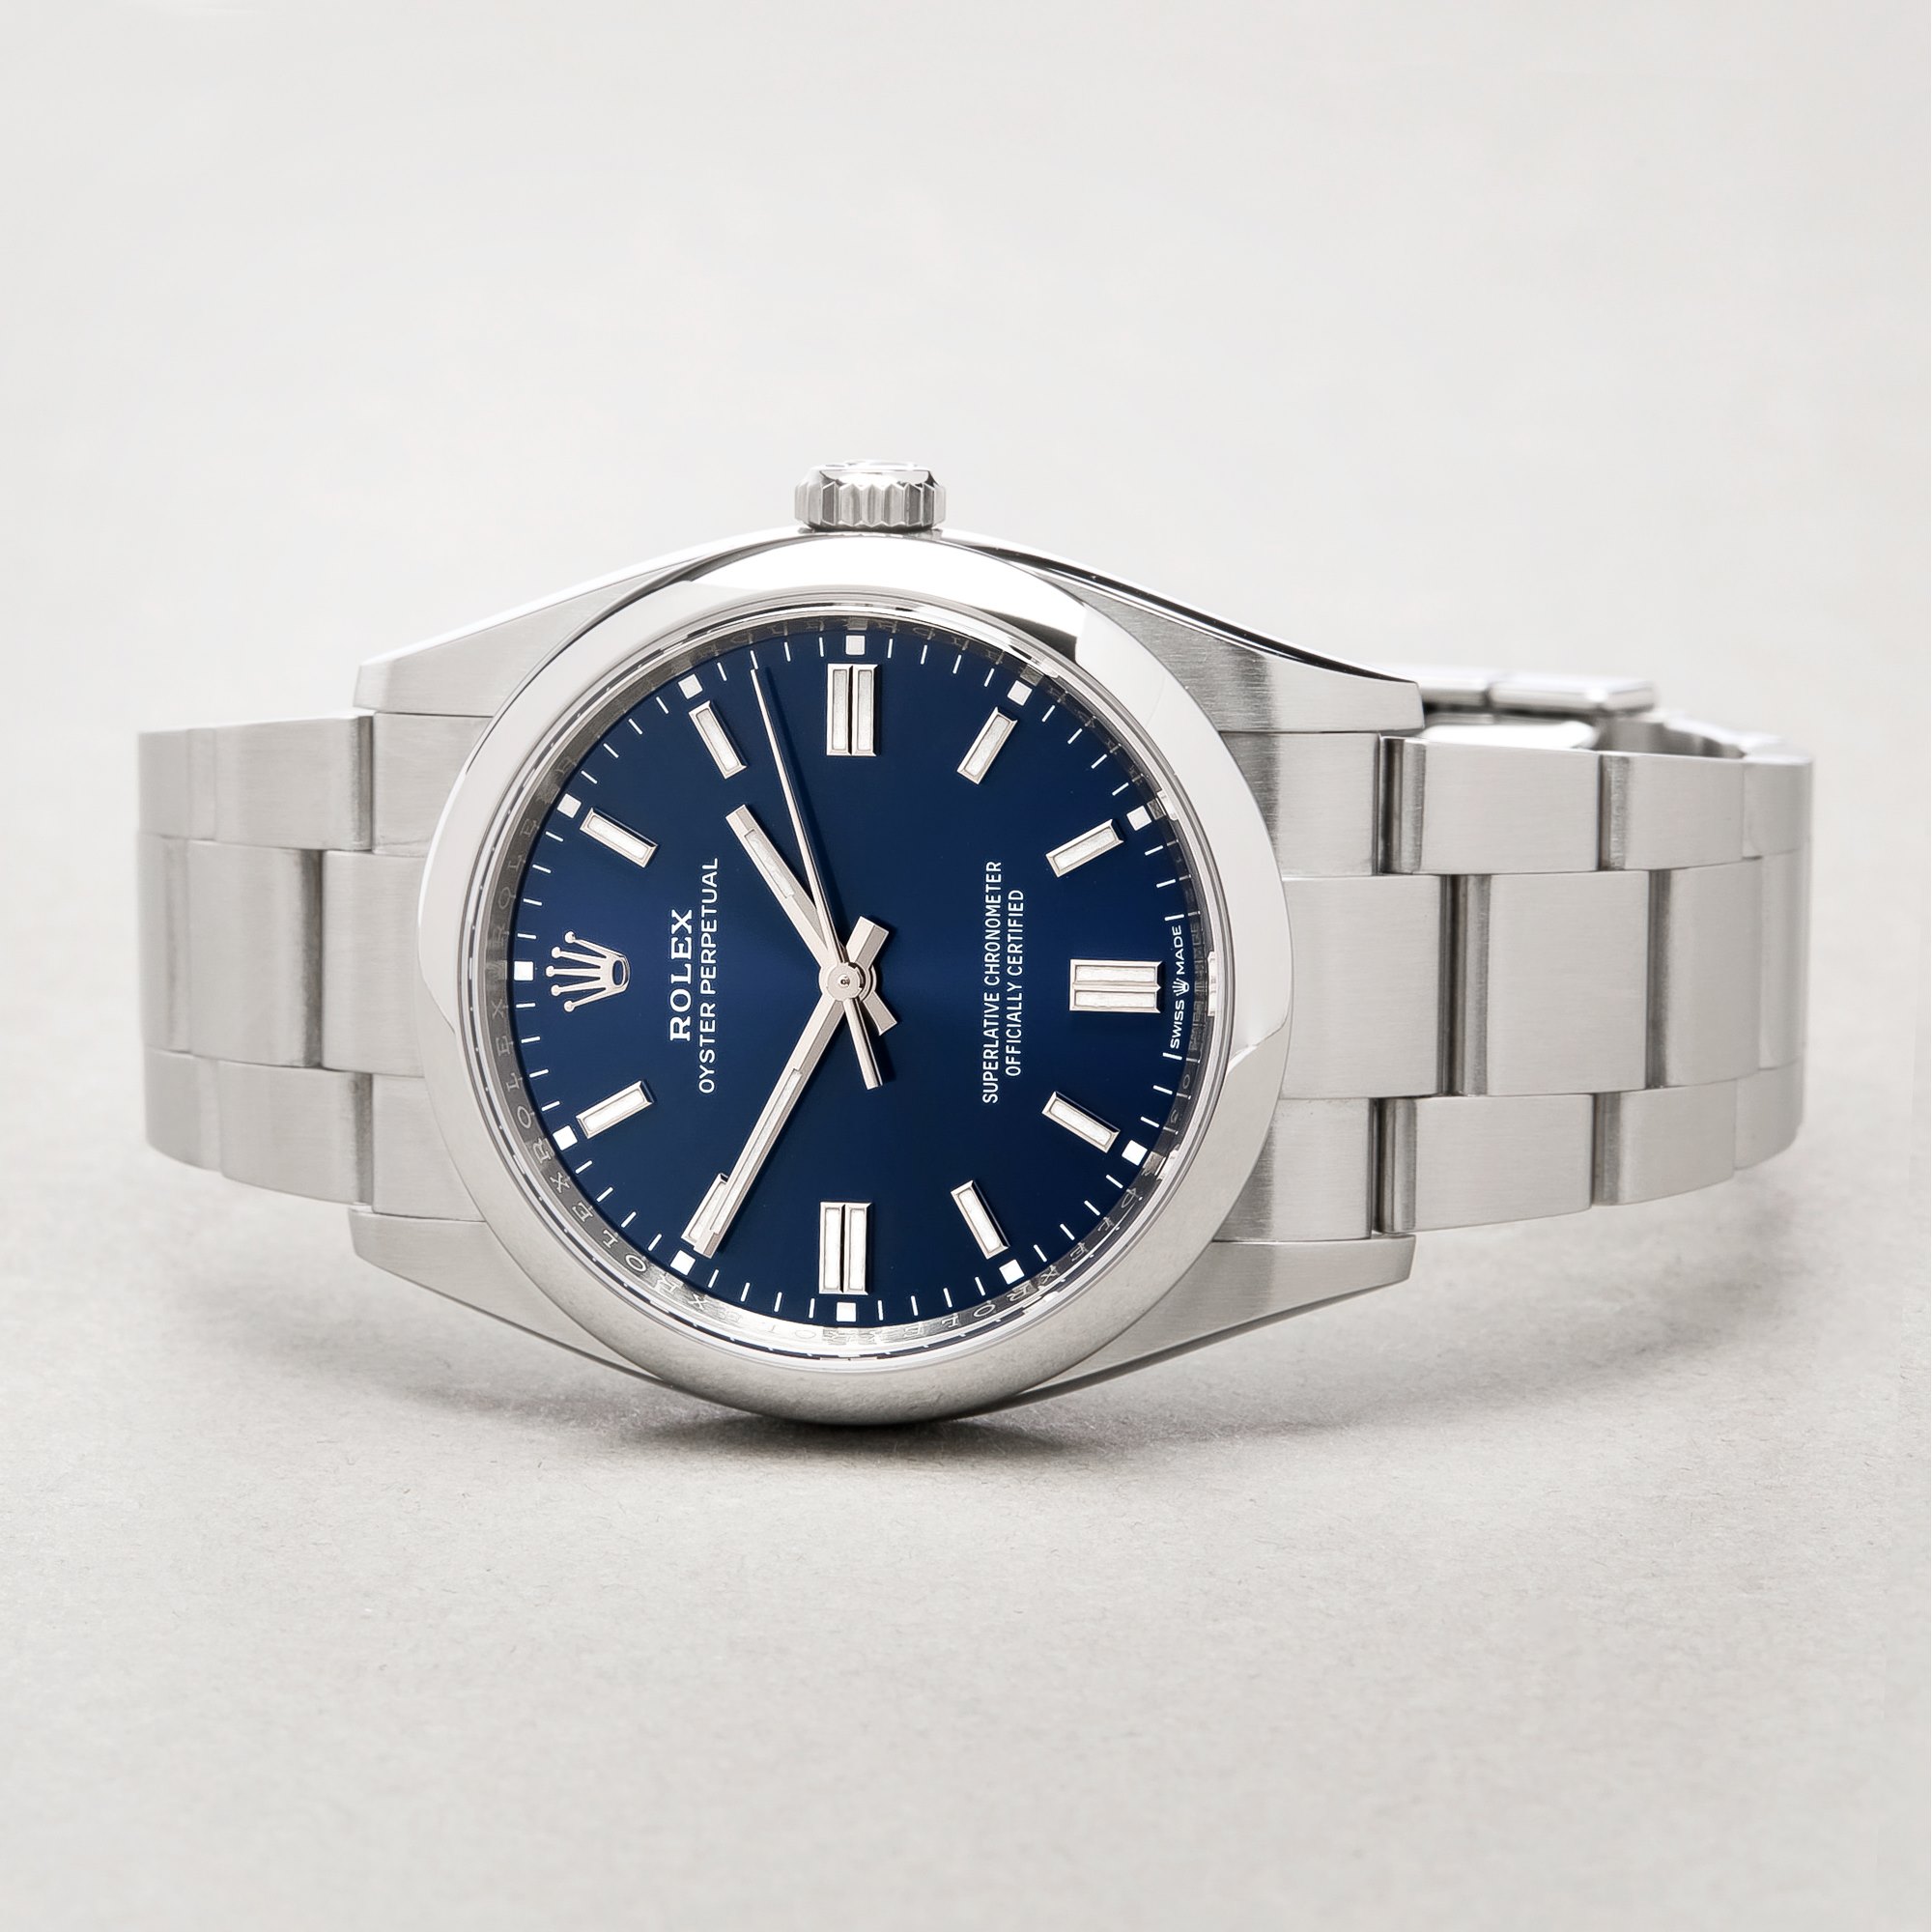 Rolex Oyster Perpetual 36 Stainless Steel 126000